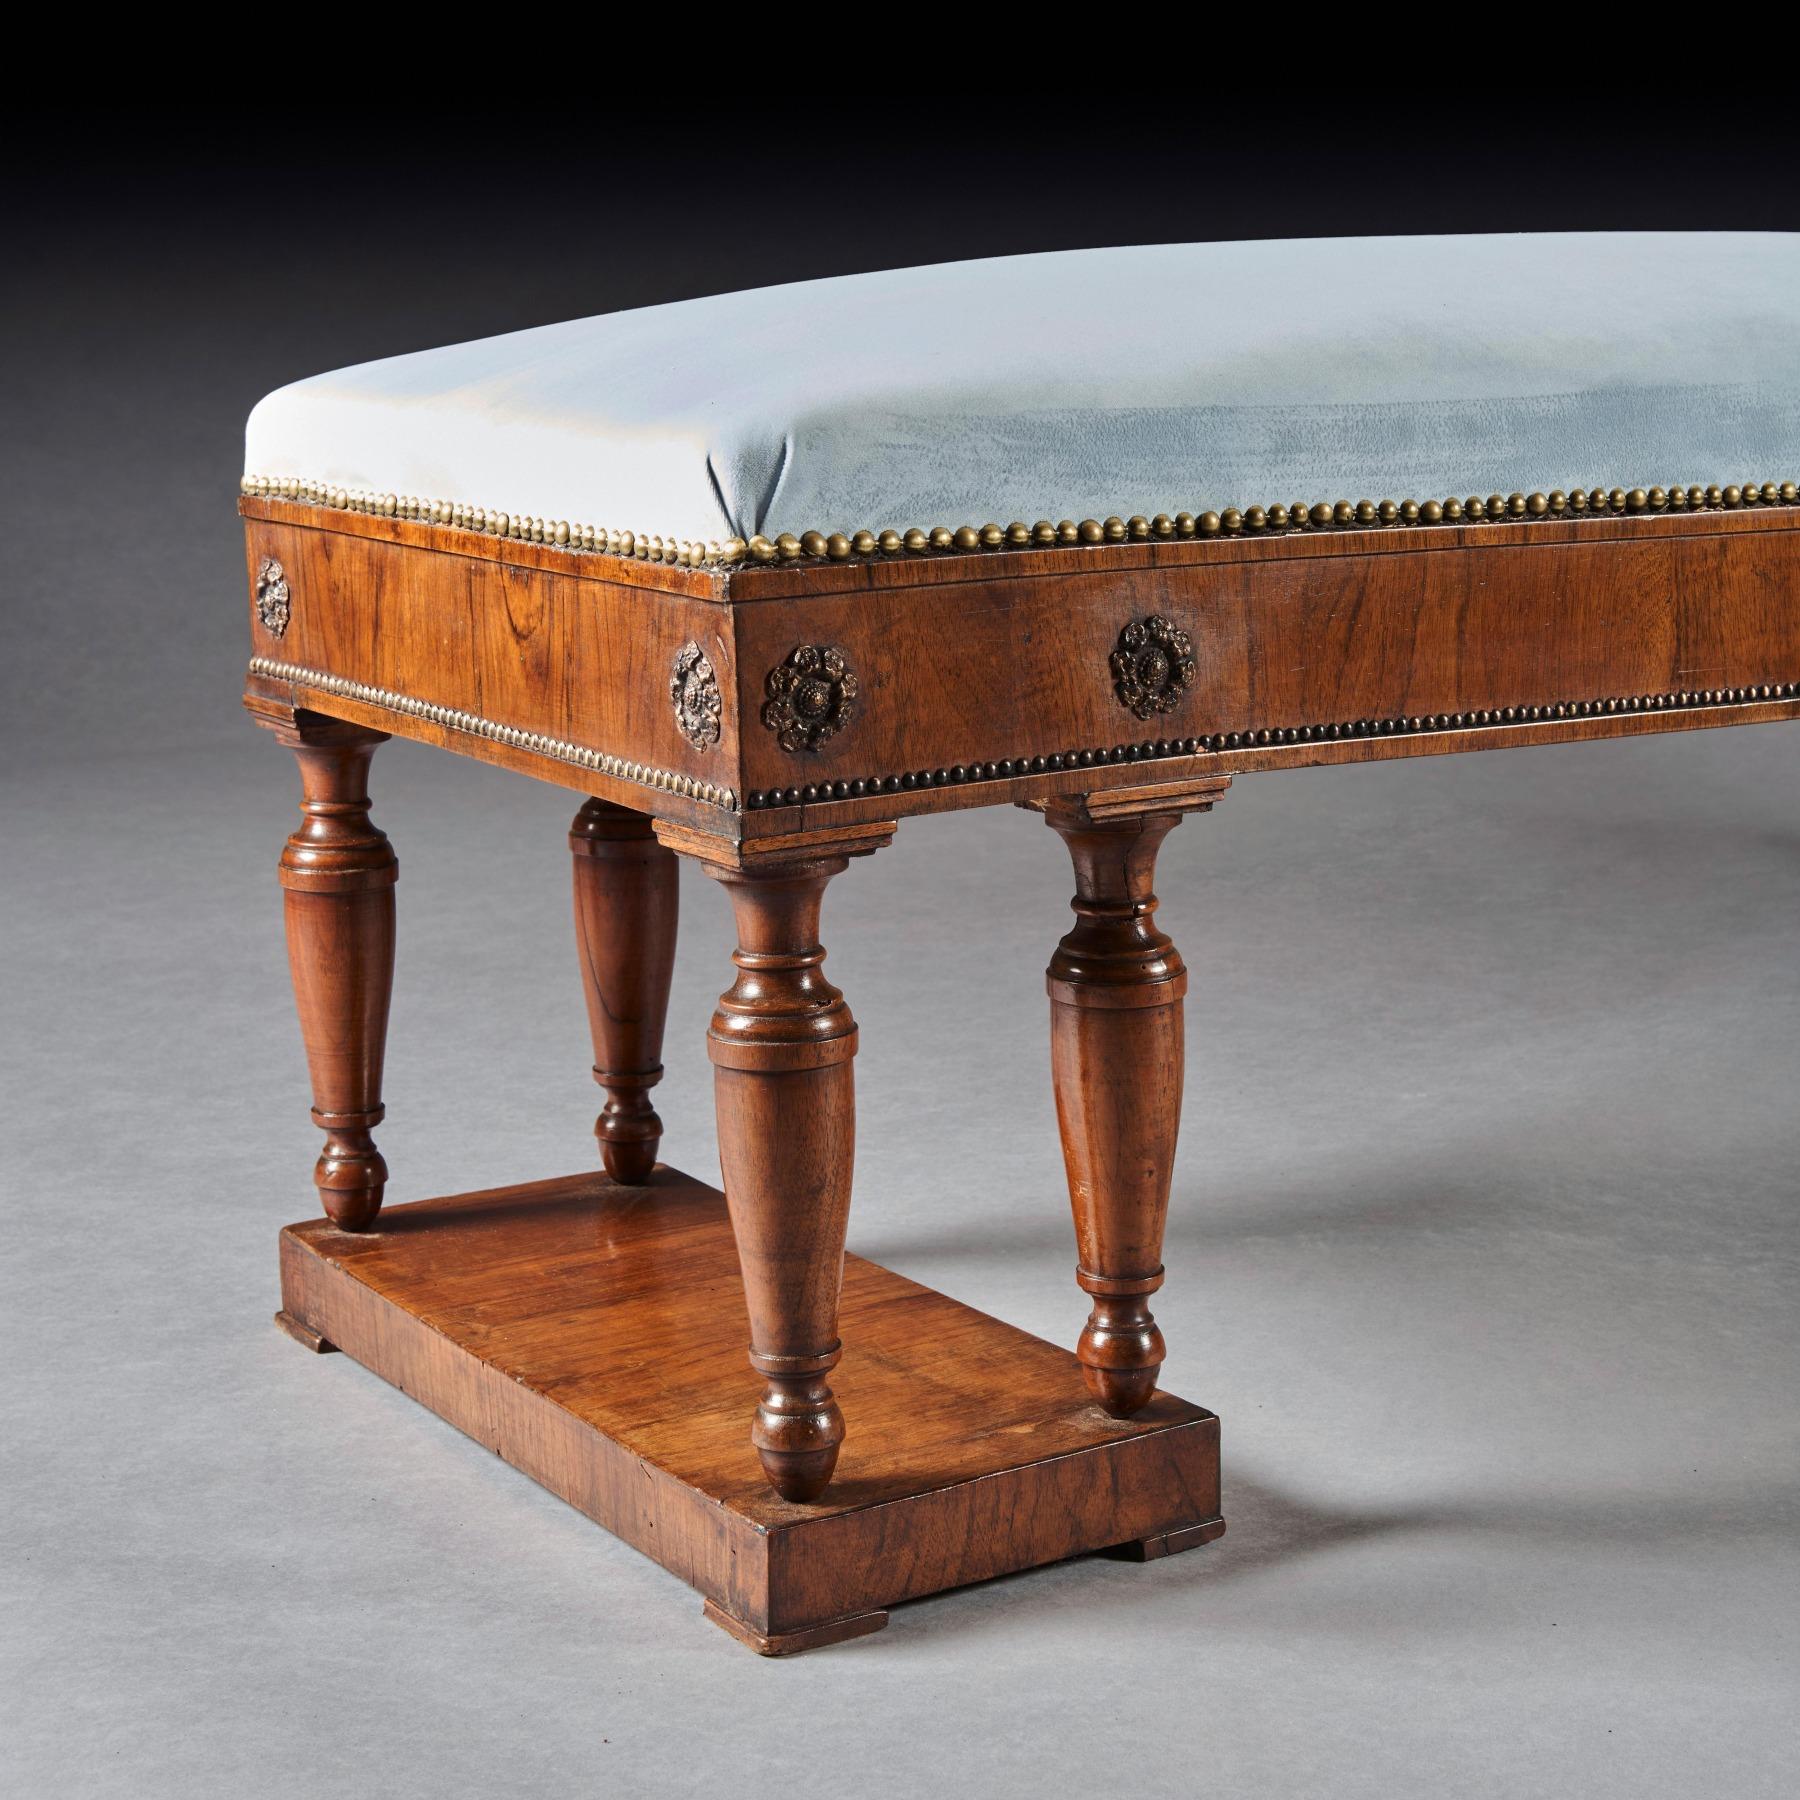 Early 19th Century Elegant Italian Neoclassical Empire Walnut Upholstered Scroll End Bench Daybed